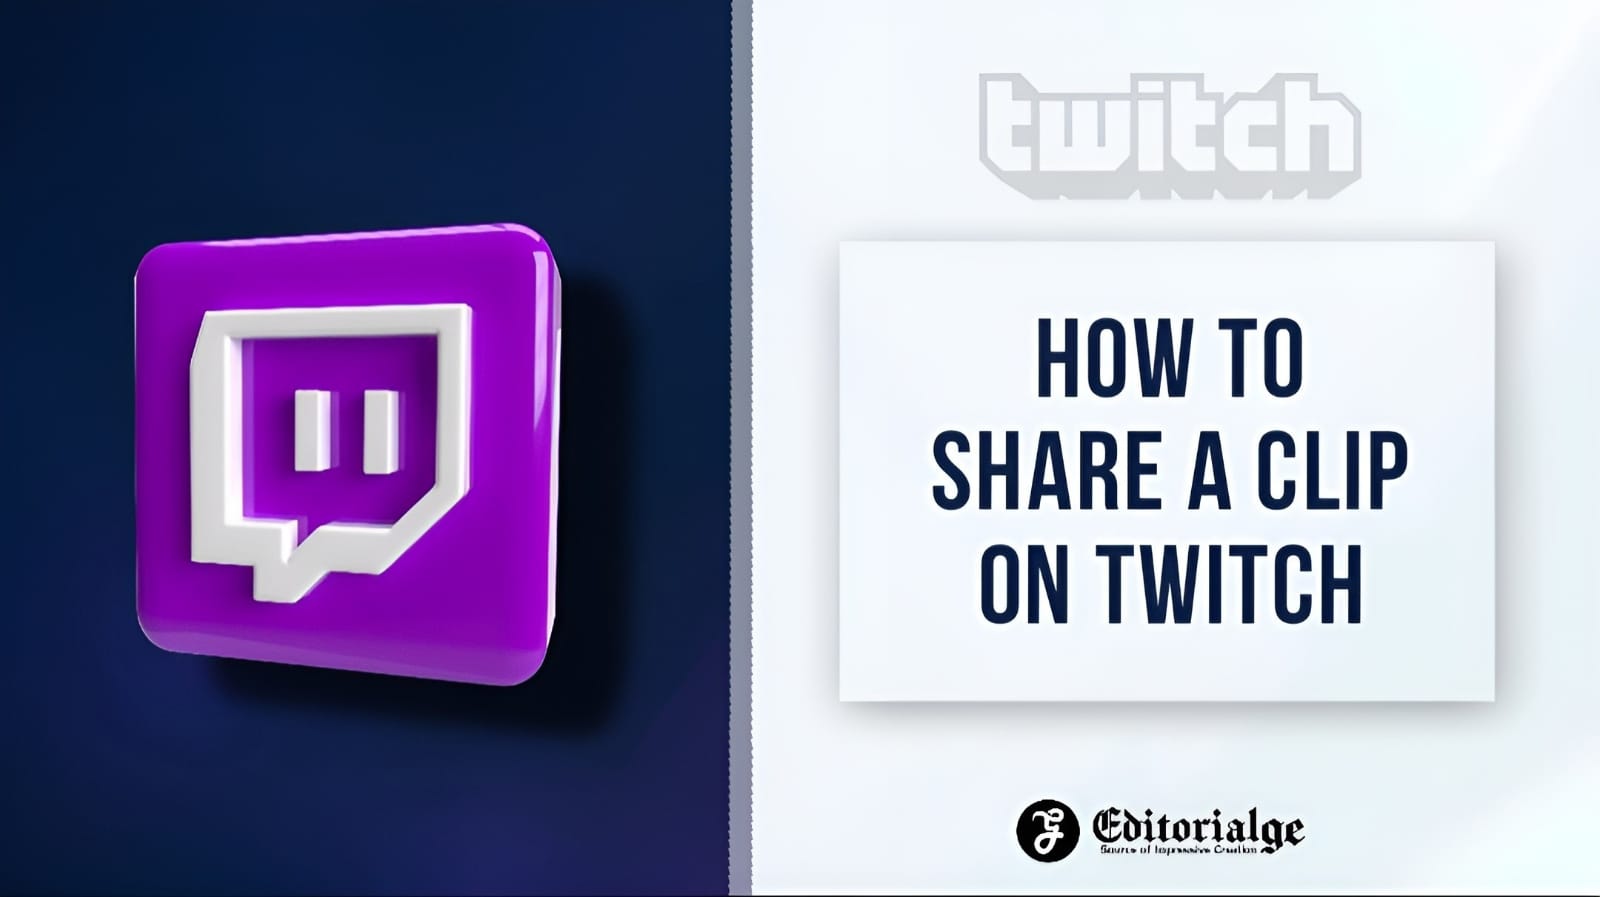 How to share a clip on twitch